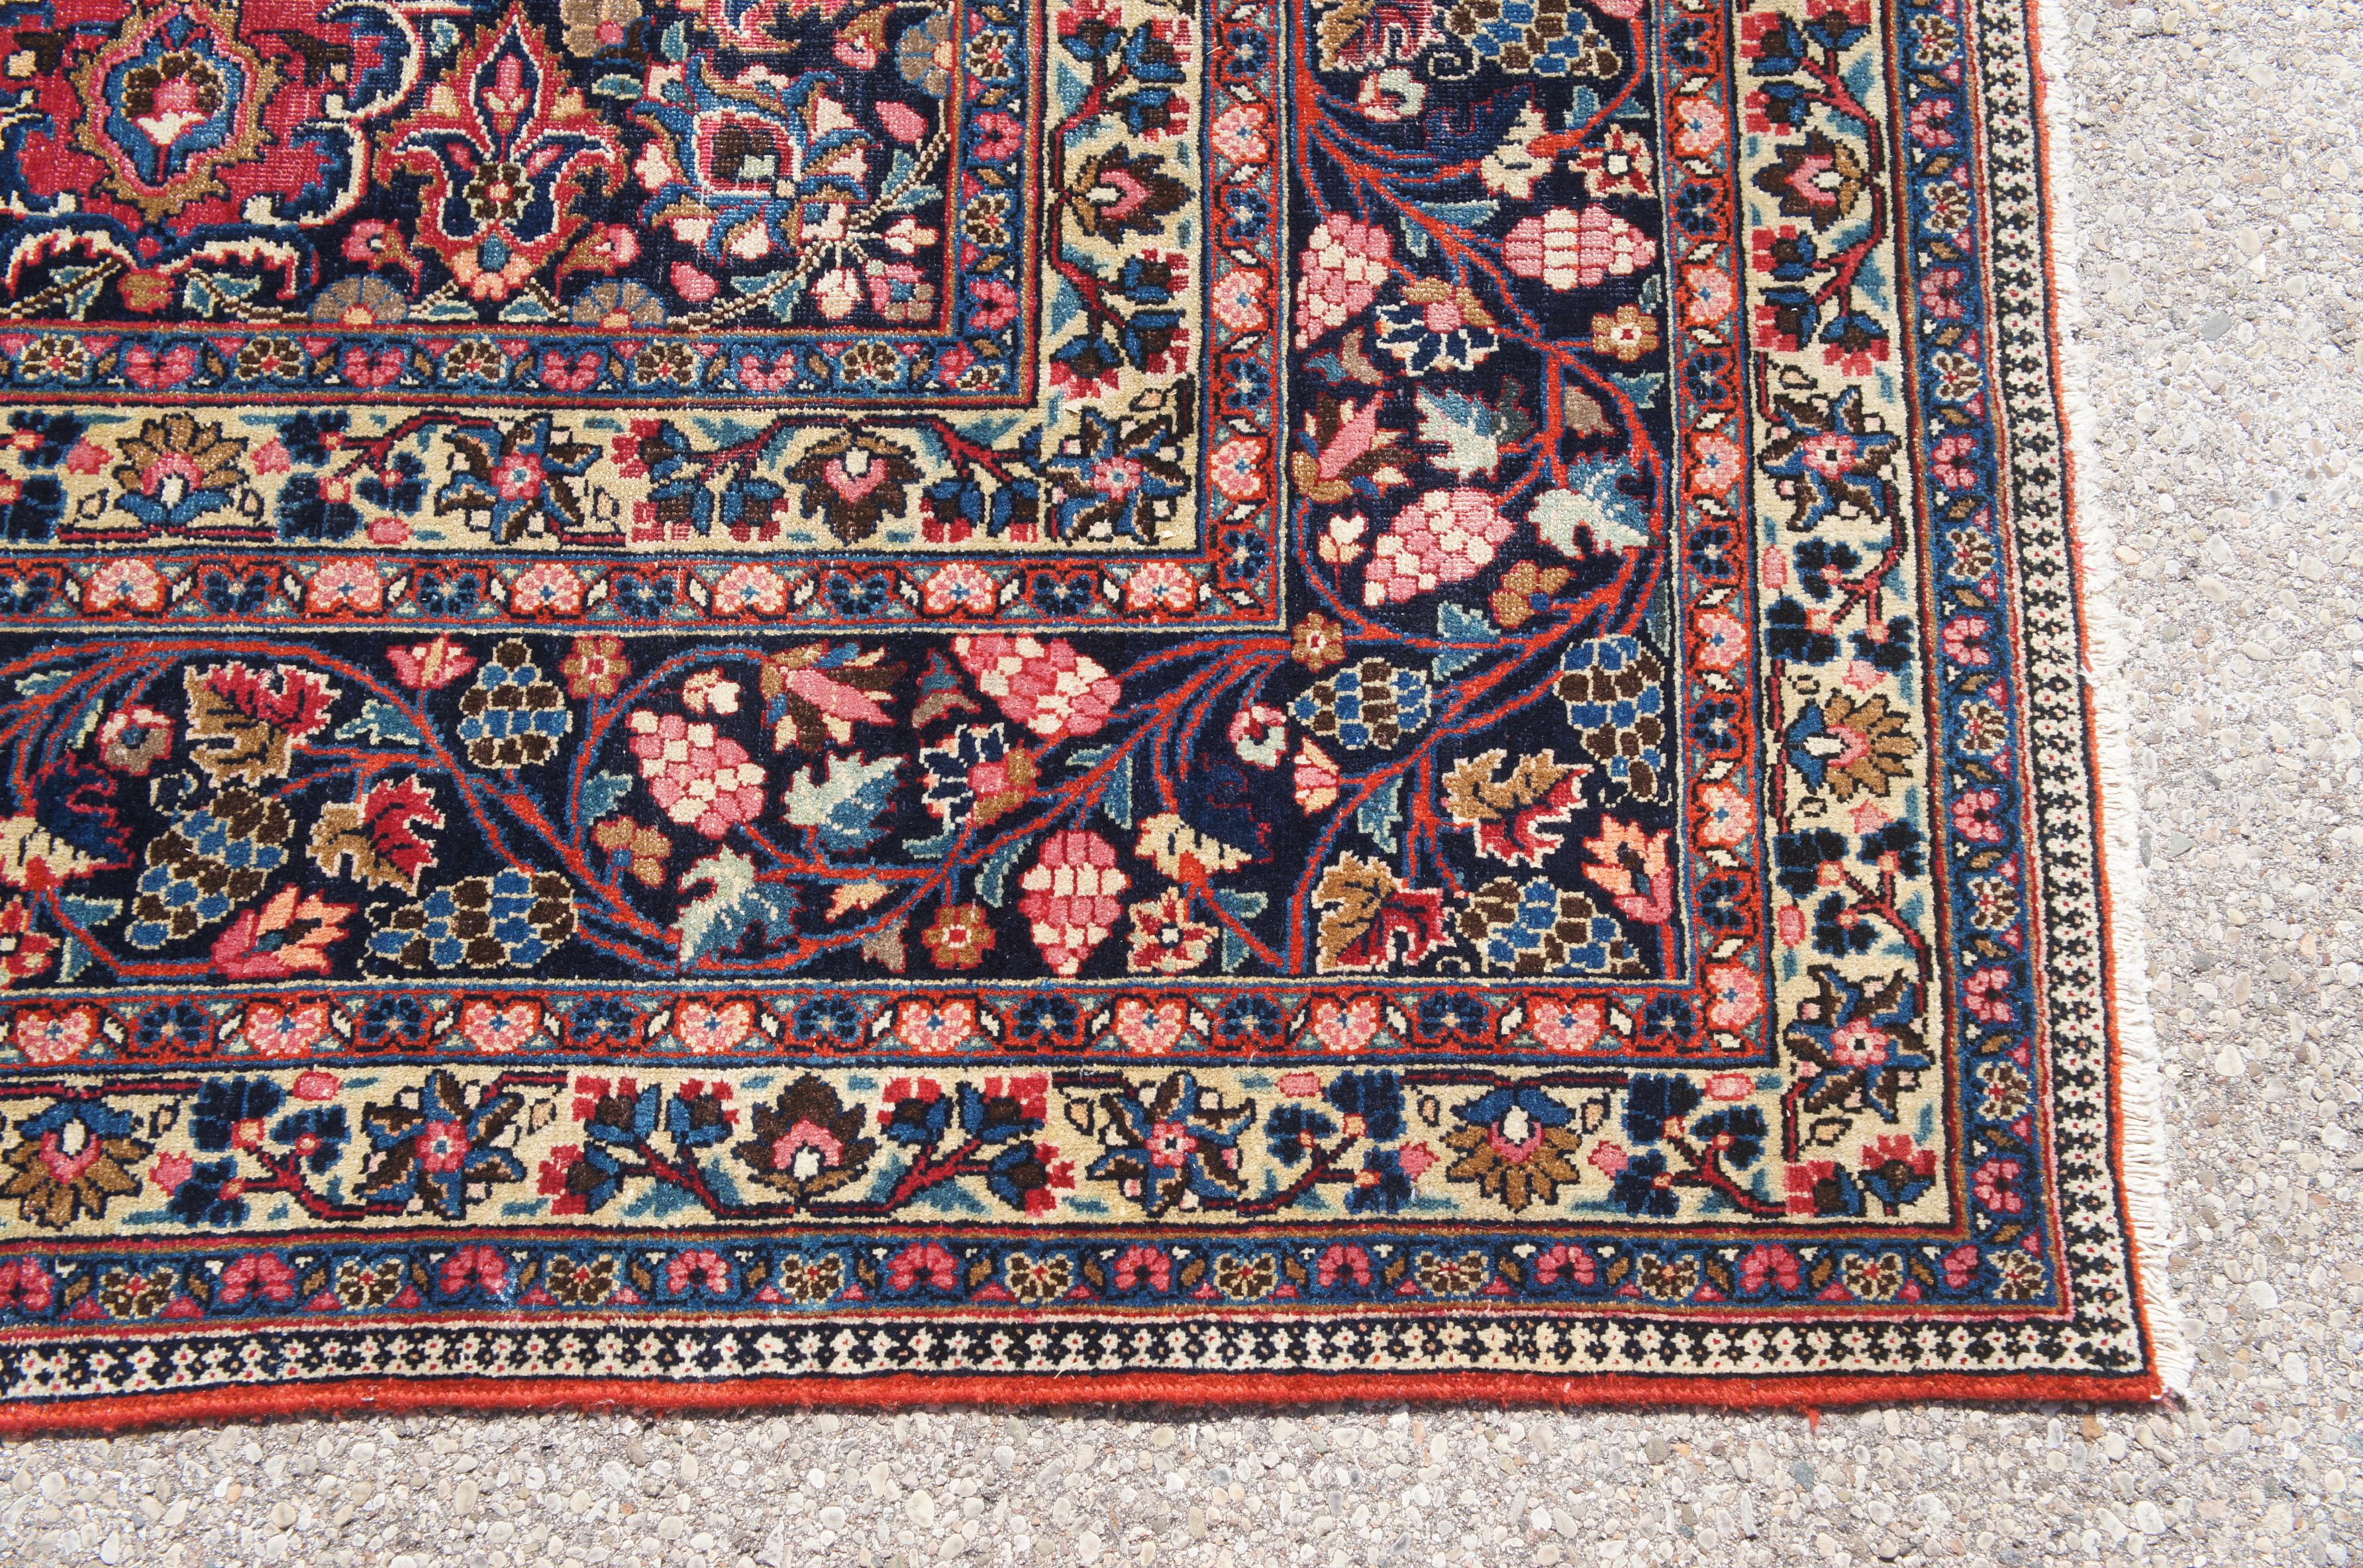 20th Century Semi Antique Hand Knotted Persian Sarouk Red Floral Medallion Area Rug 10' x 14' For Sale